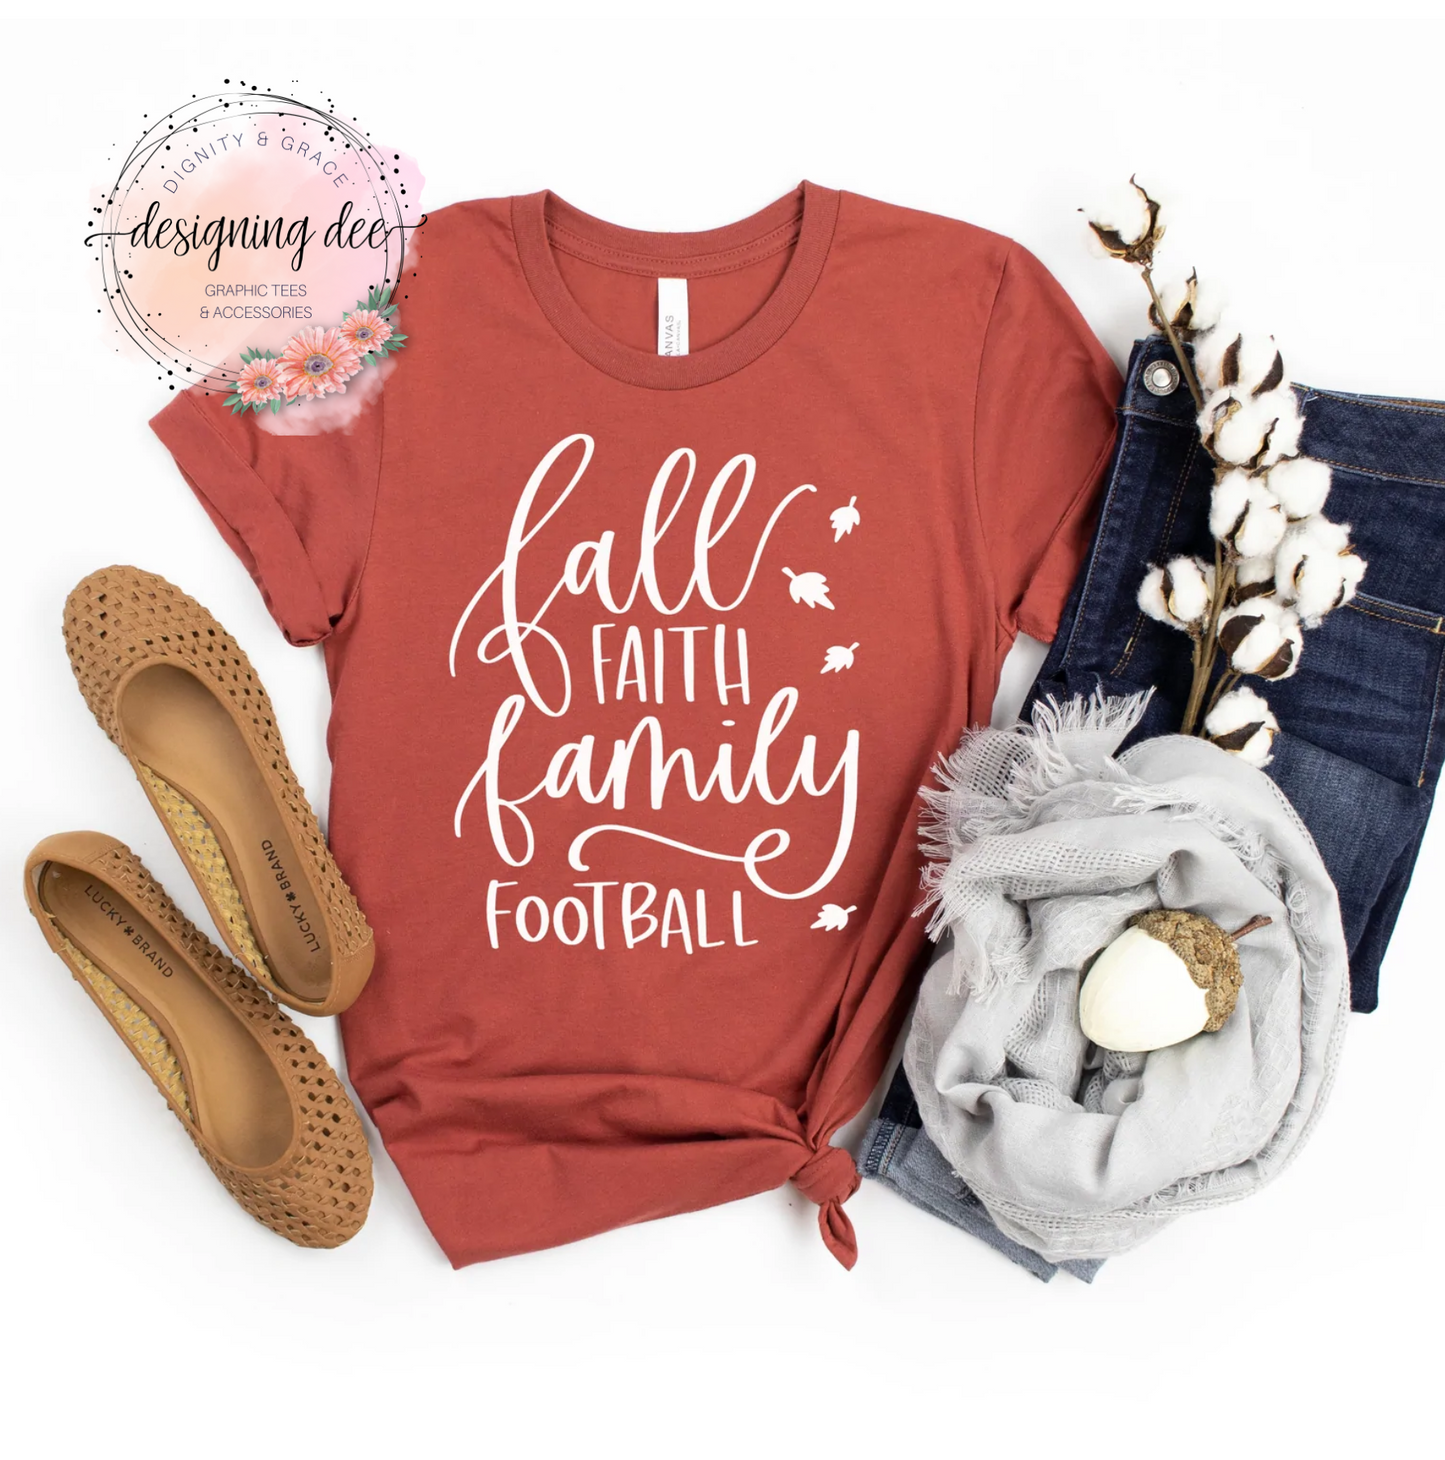 Game Day Football Shirt for Women